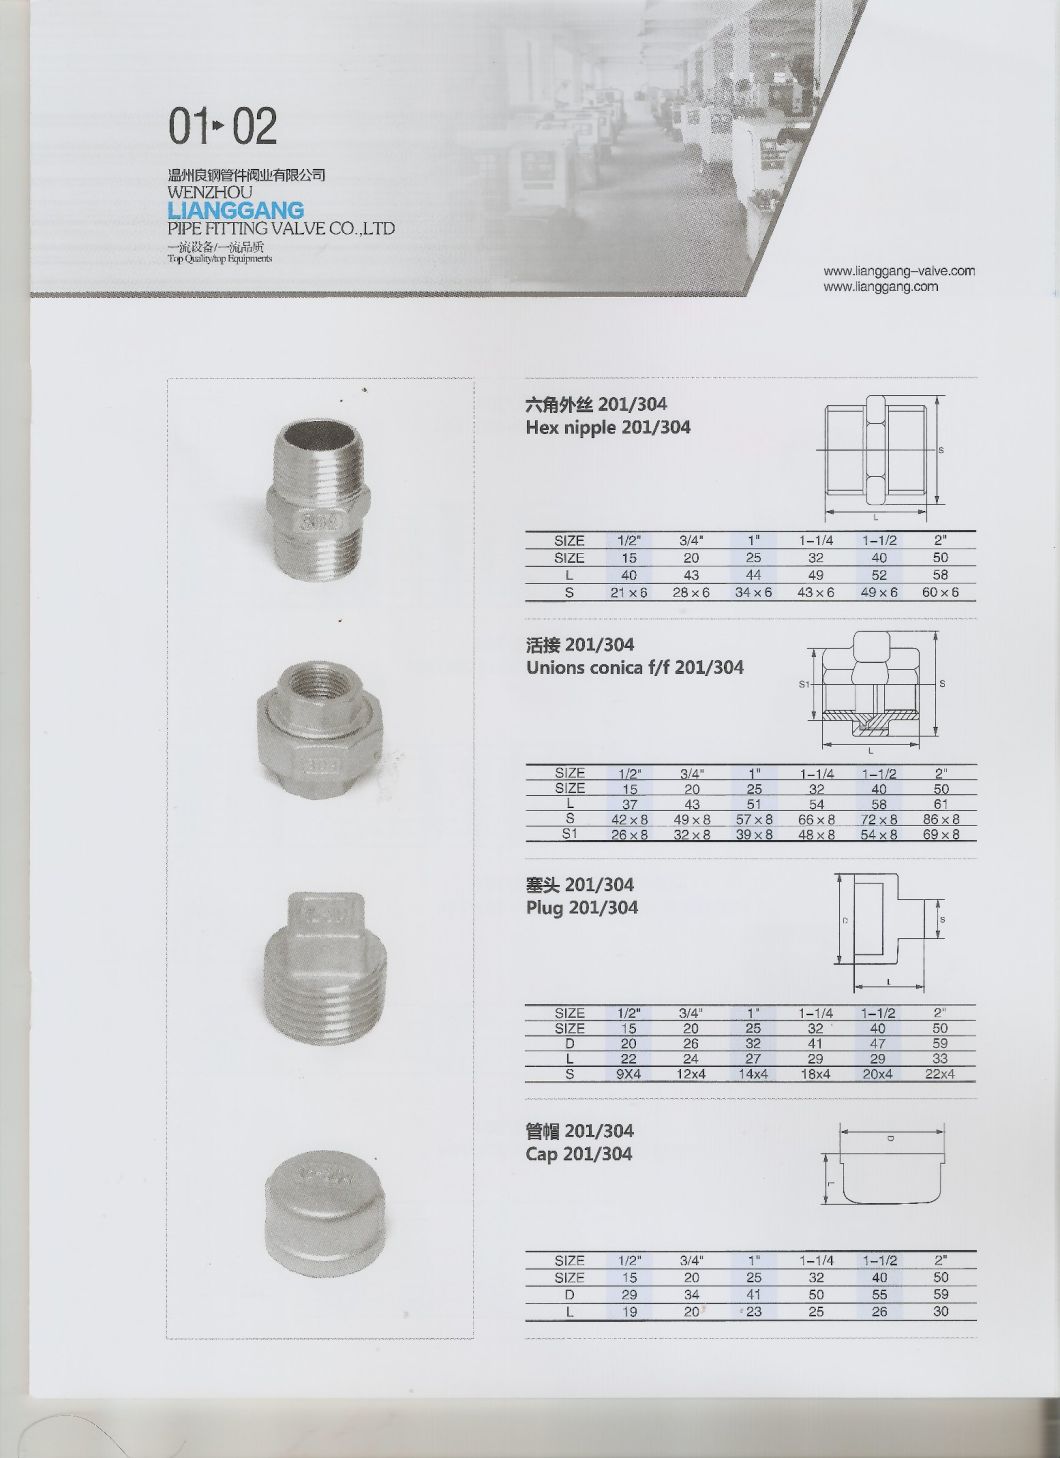 Stainless Steel Pipe Fitting SS304 BSPT NPT Thread Screw Union 1/2inch